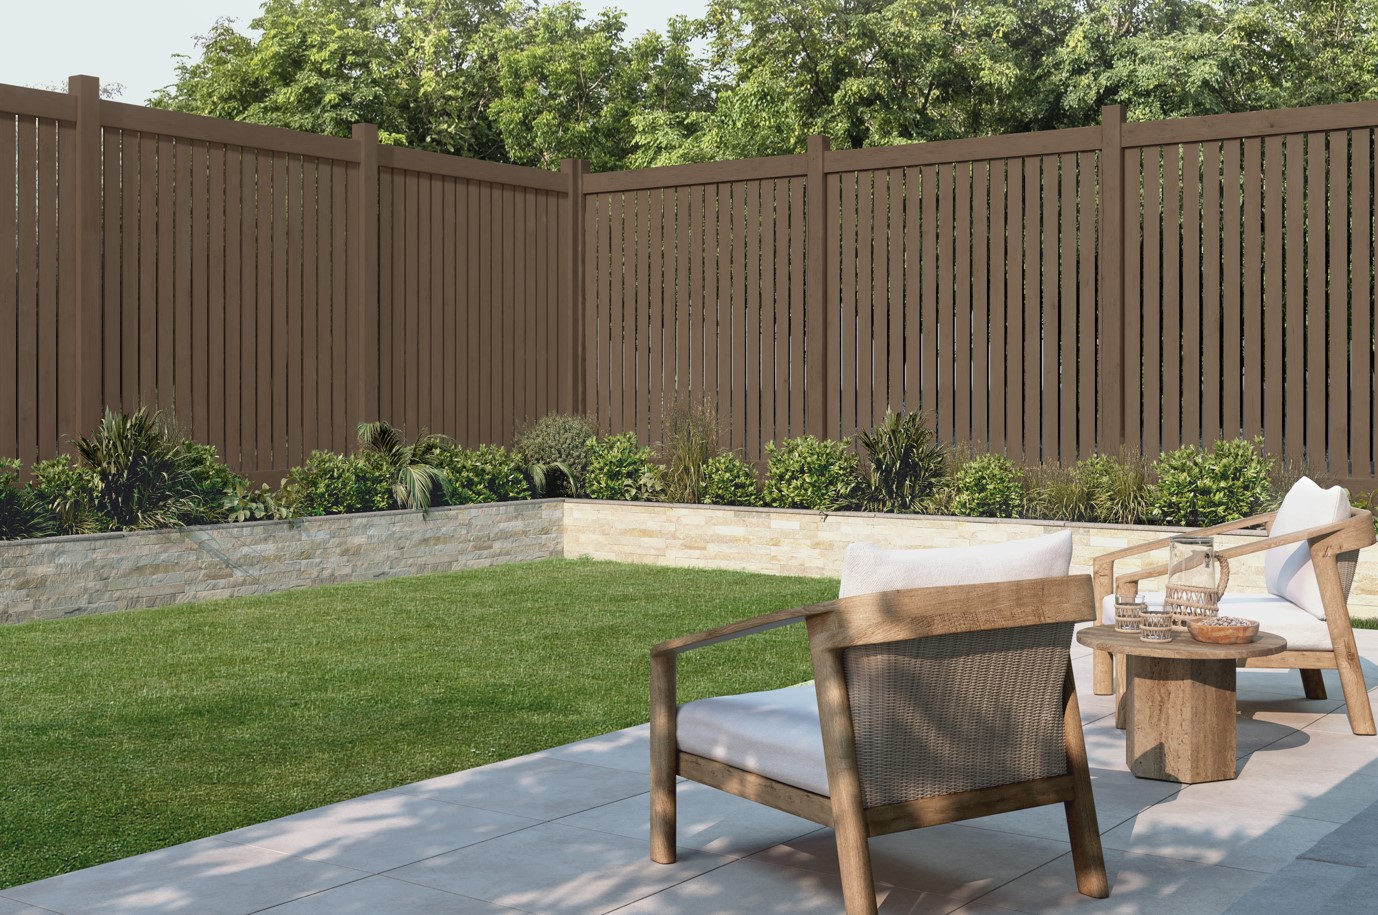 A brown solid colour wood fence in a backyard with two outdoor lounge chairs nearby